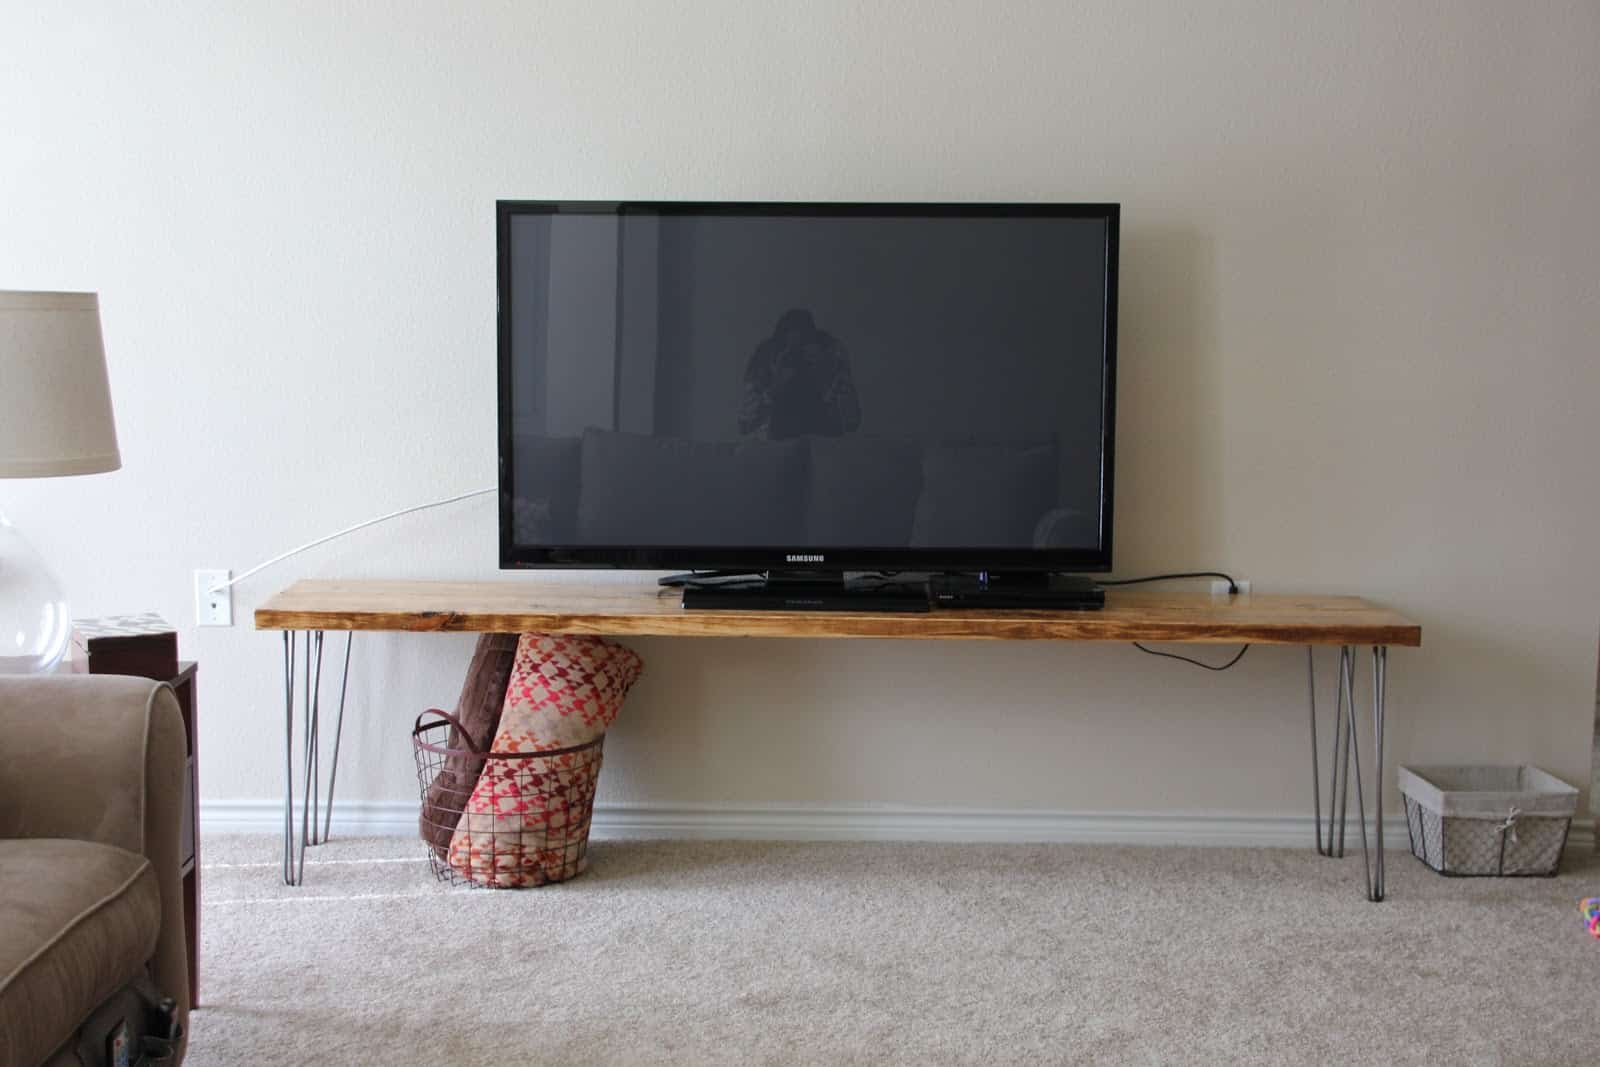 Transform your living room with the best DIY TV cabinet!